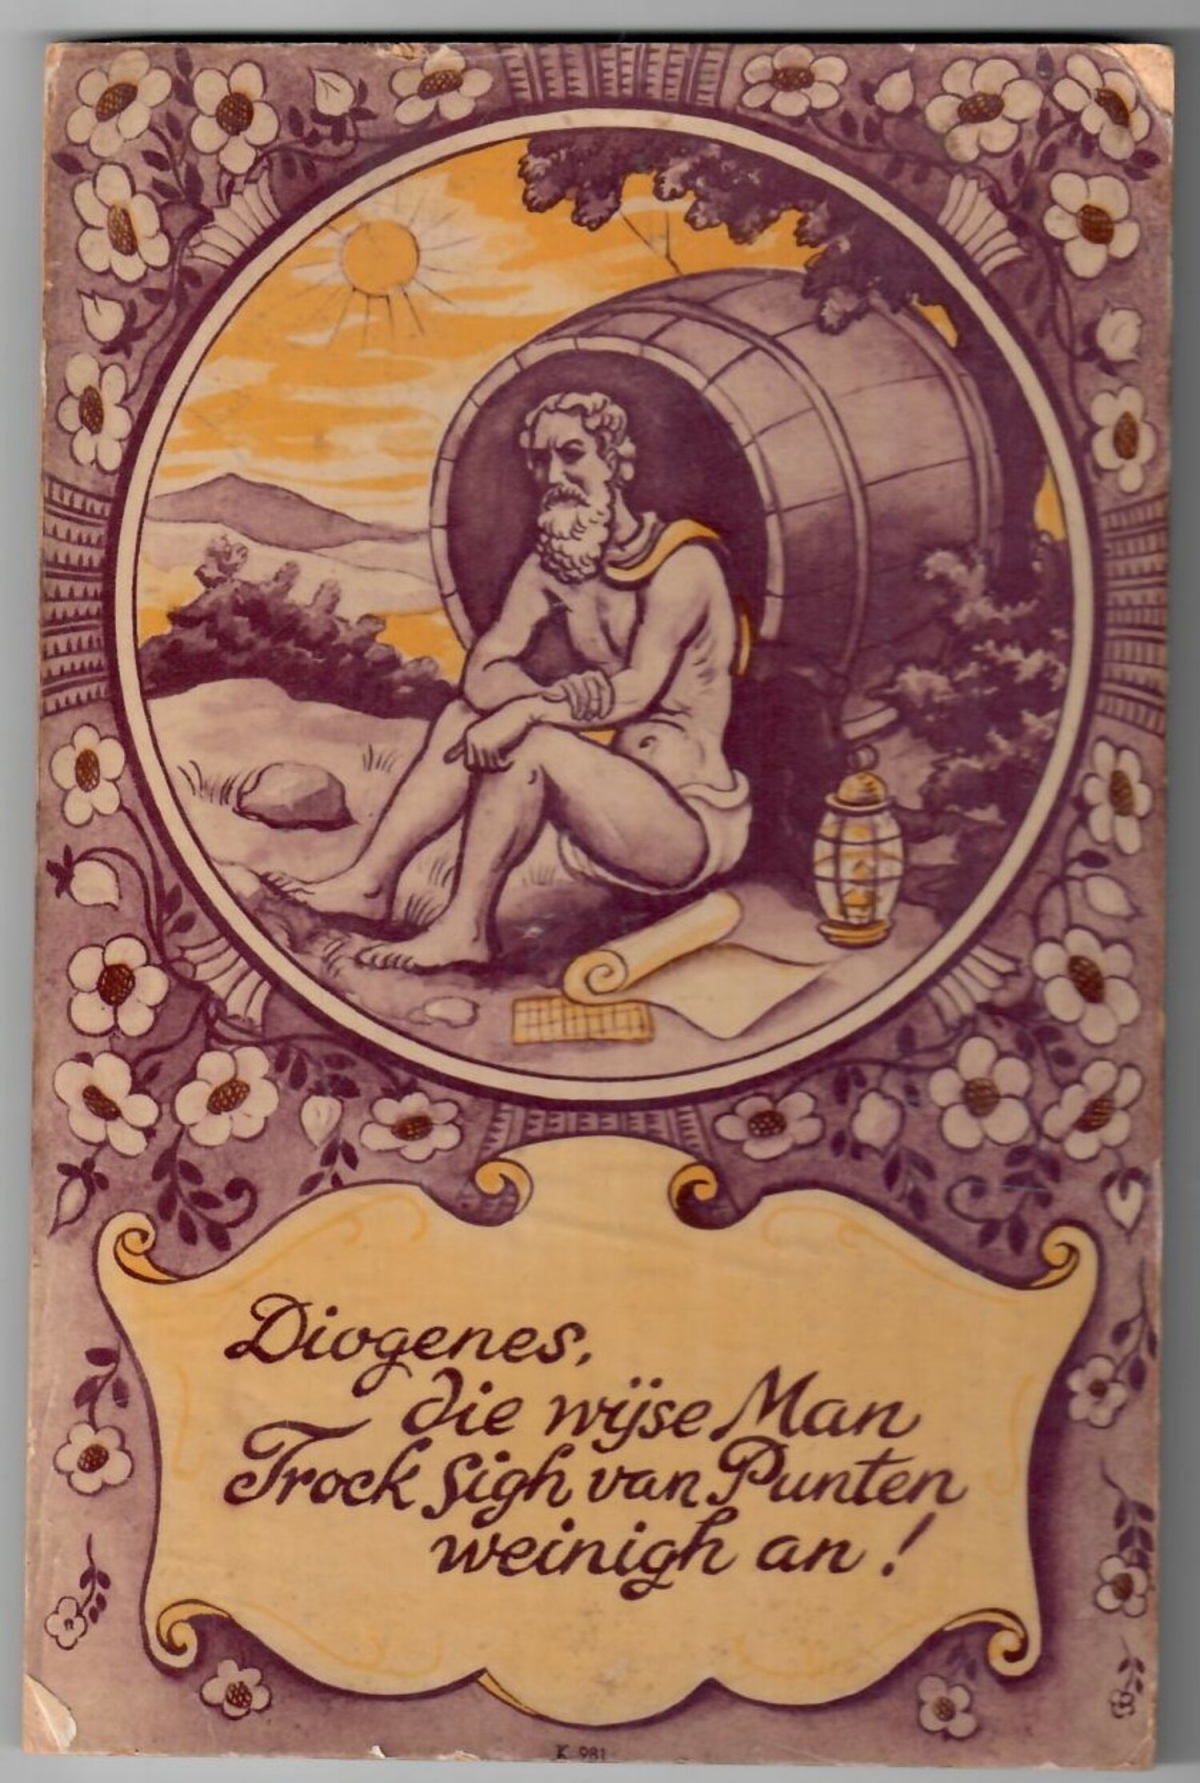 Card tile, protesting against rationing, the Netherlands, 1940&#039;s. The text states:  &quot;Diogenes, die wijse Man Trock sigh van Punten weinigh an!&quot;.